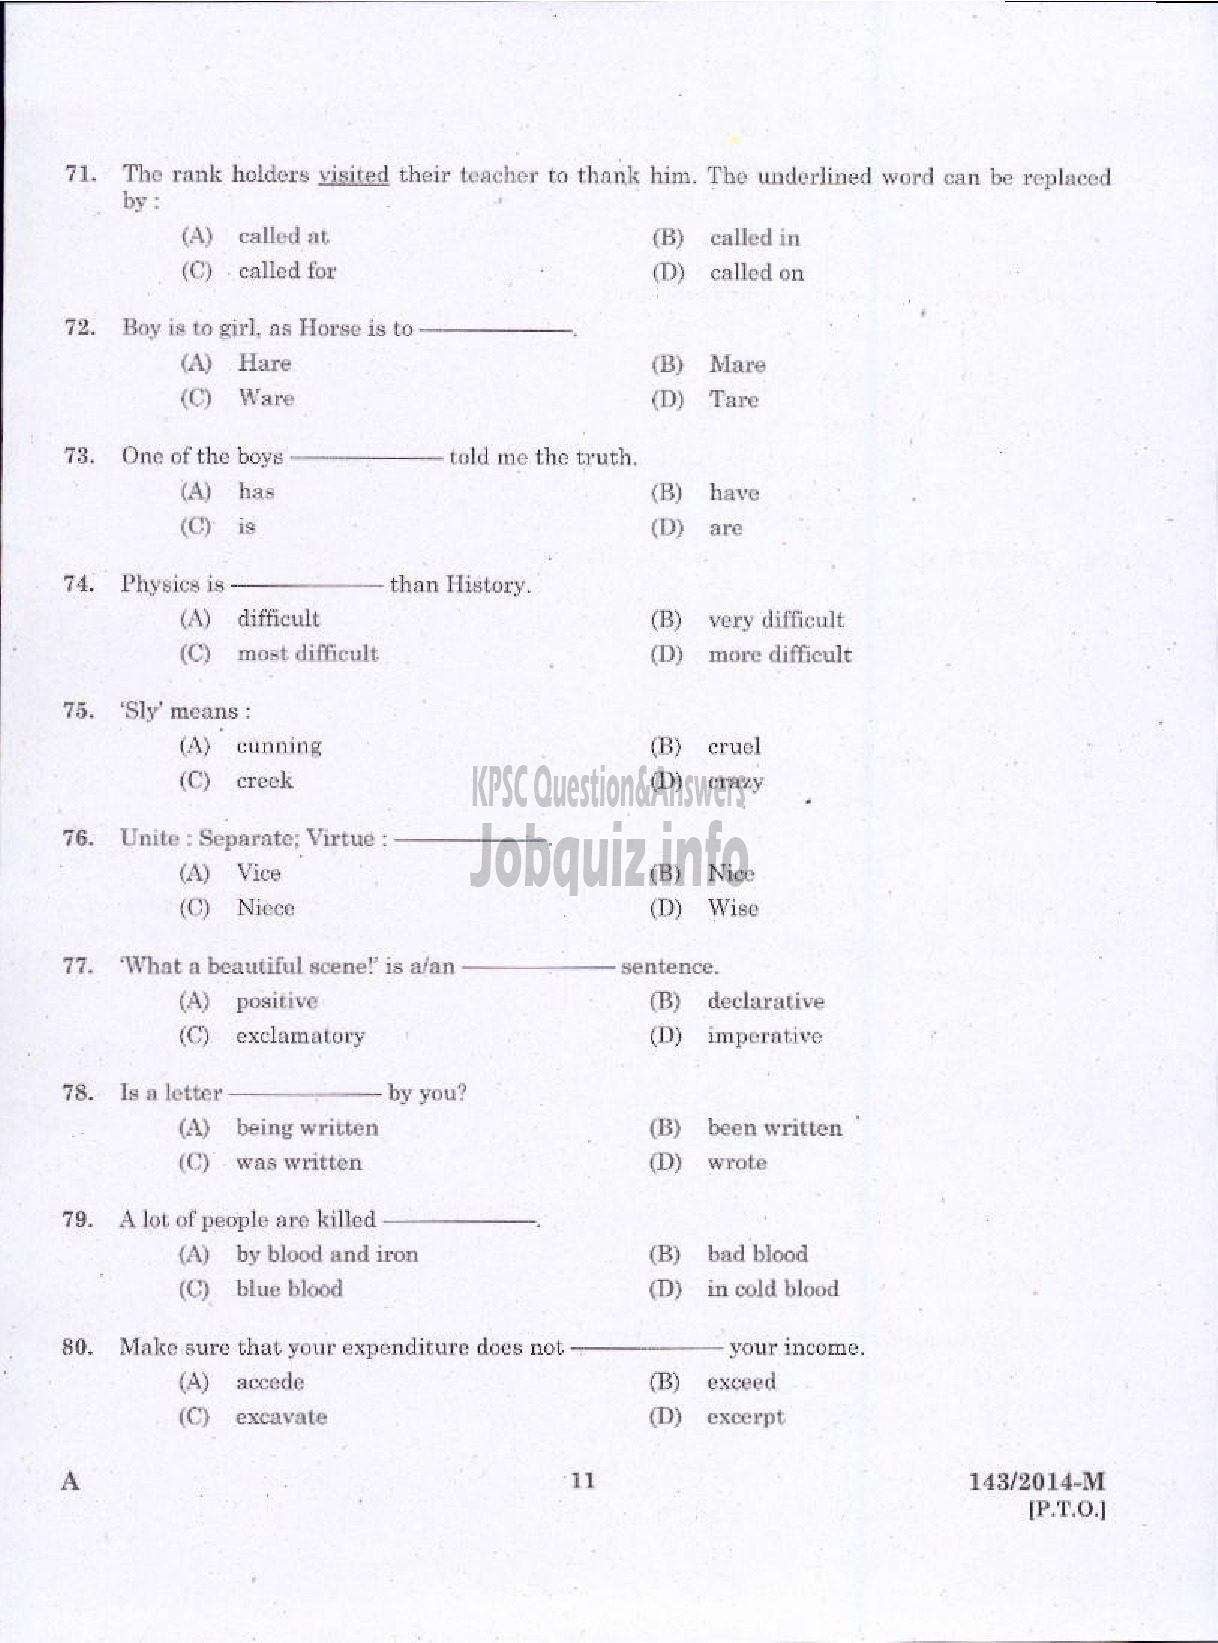 Kerala PSC Question Paper - WOMEN POLICE CONSTABLE APB POLICE MALE WARDER JAIL TSR AND KNR UNIT ( Malayalam ) -9